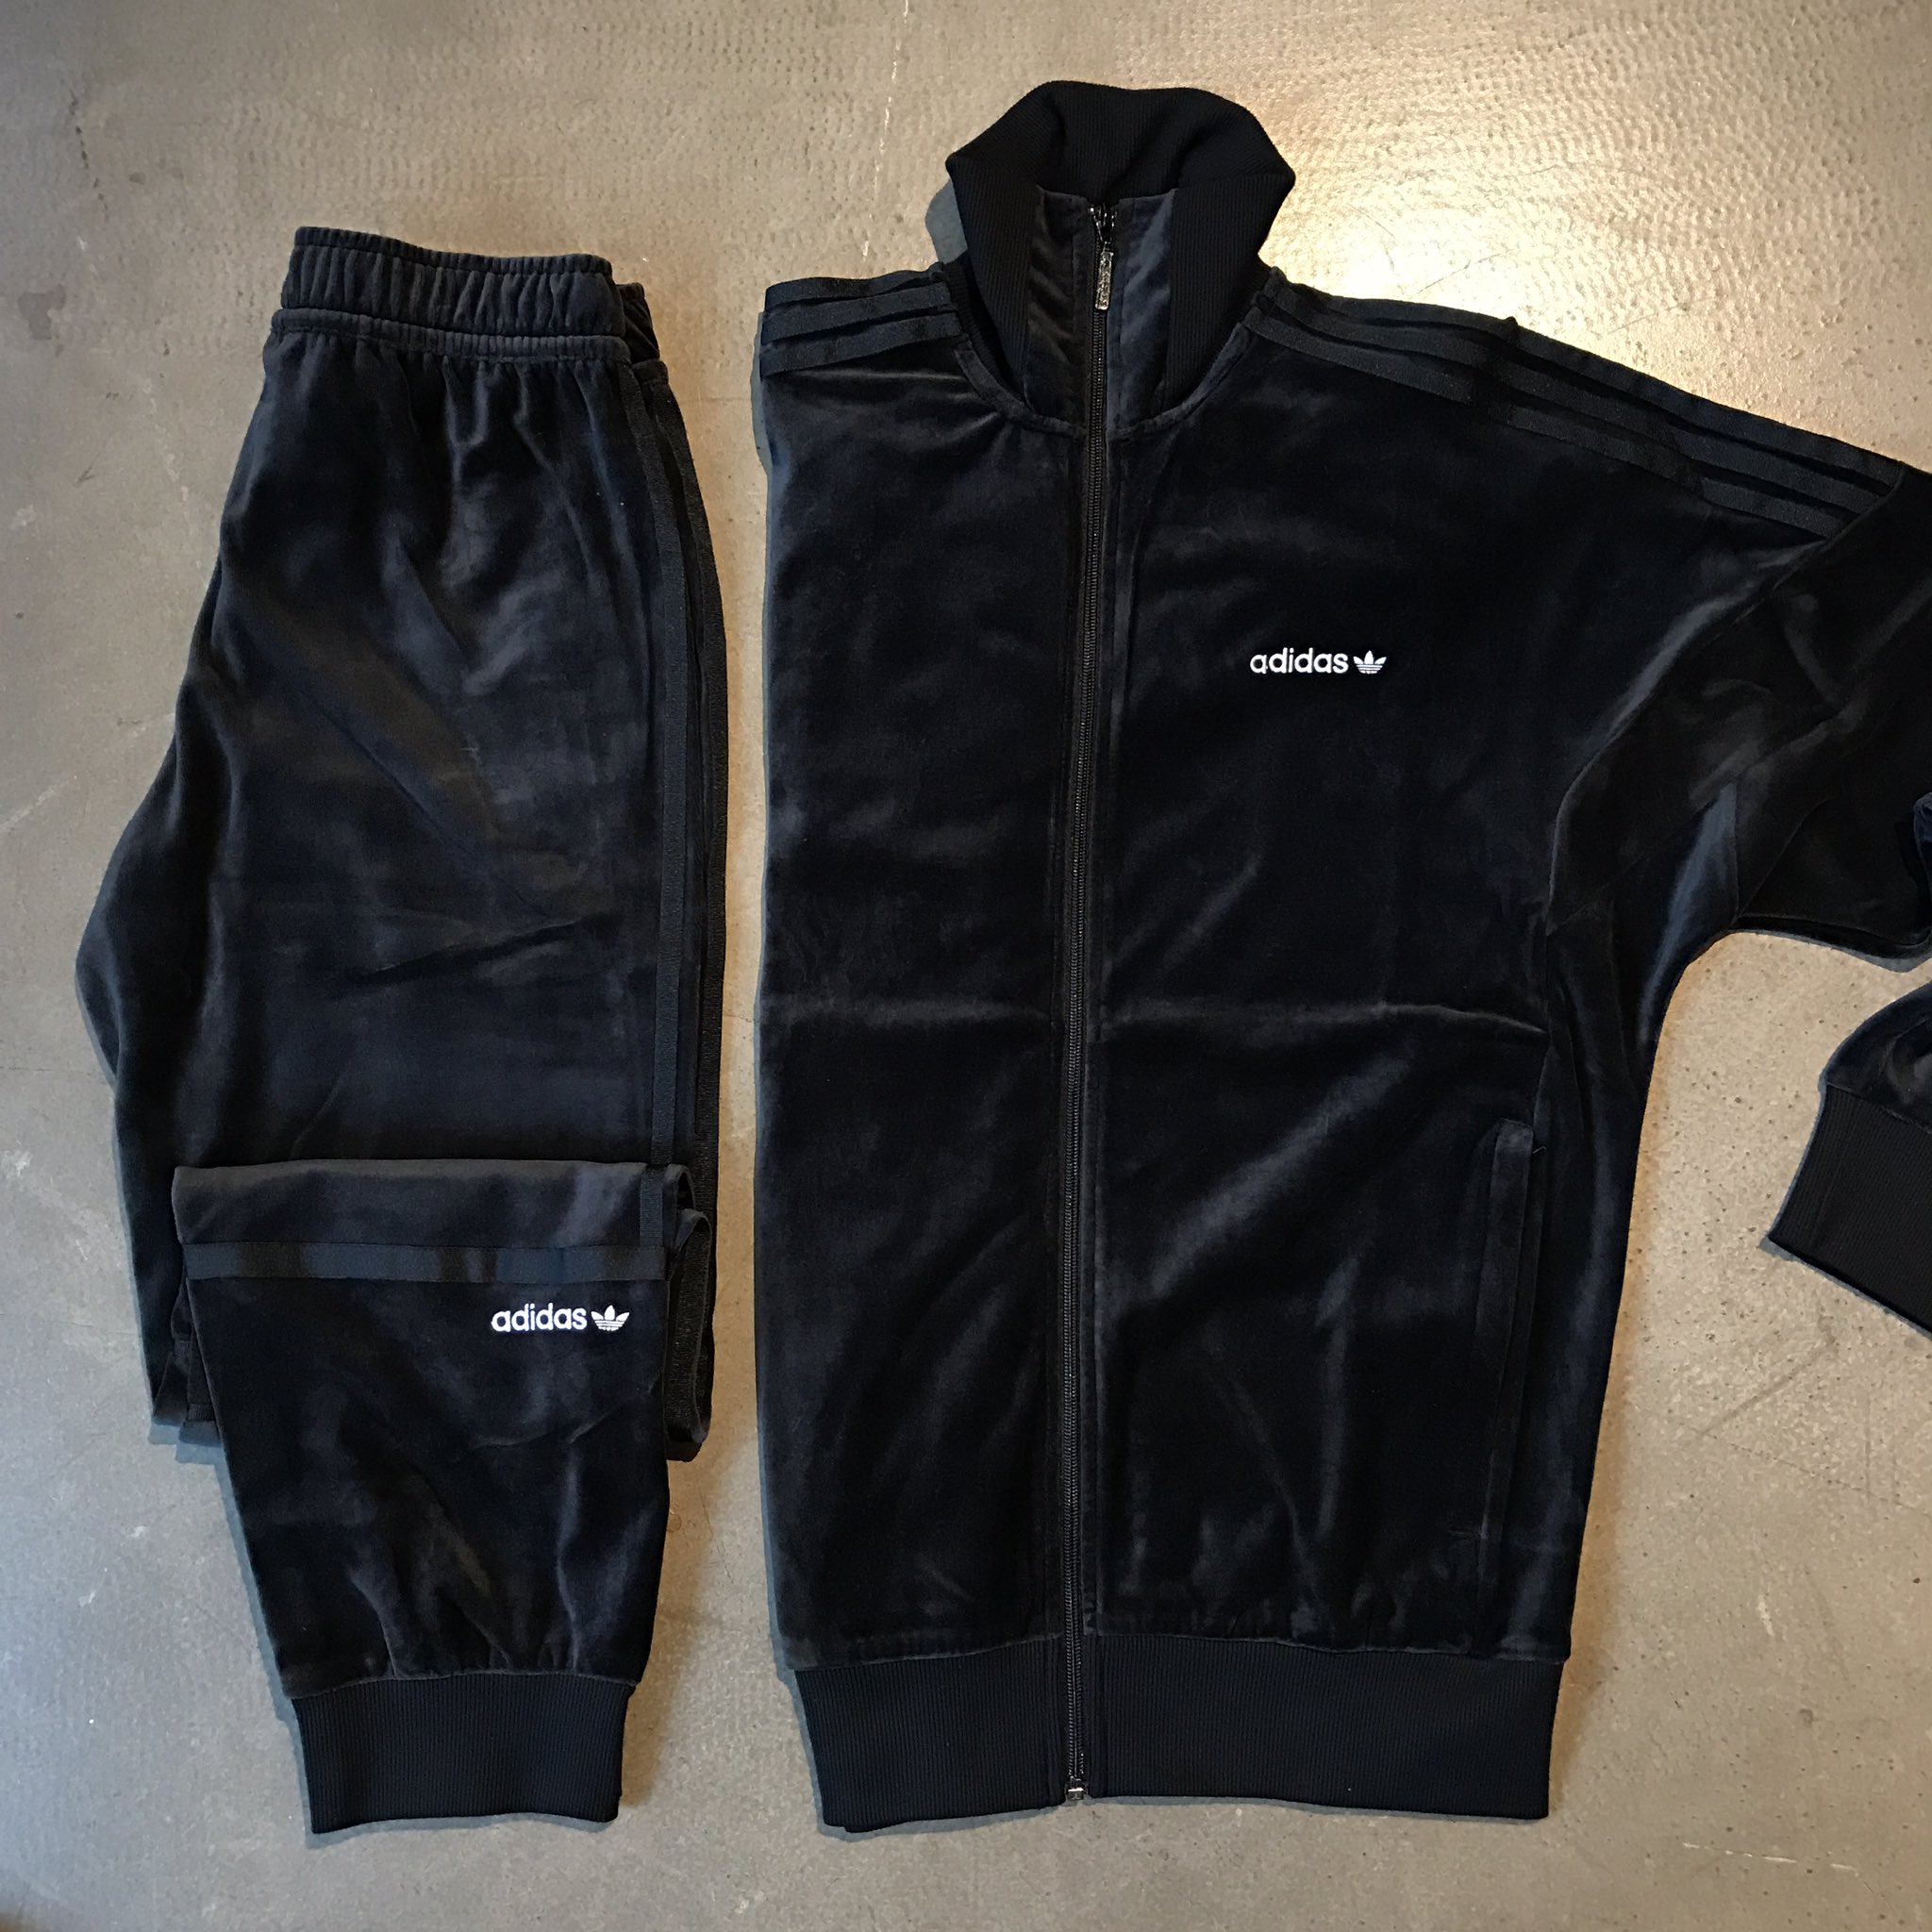 wellgosh on Twitter: "adidas CLR84 Velour Tracksuit available now 🔥 . . . https://t.co/KPJNZehPQq https://t.co/isDjtCY39c" / Twitter